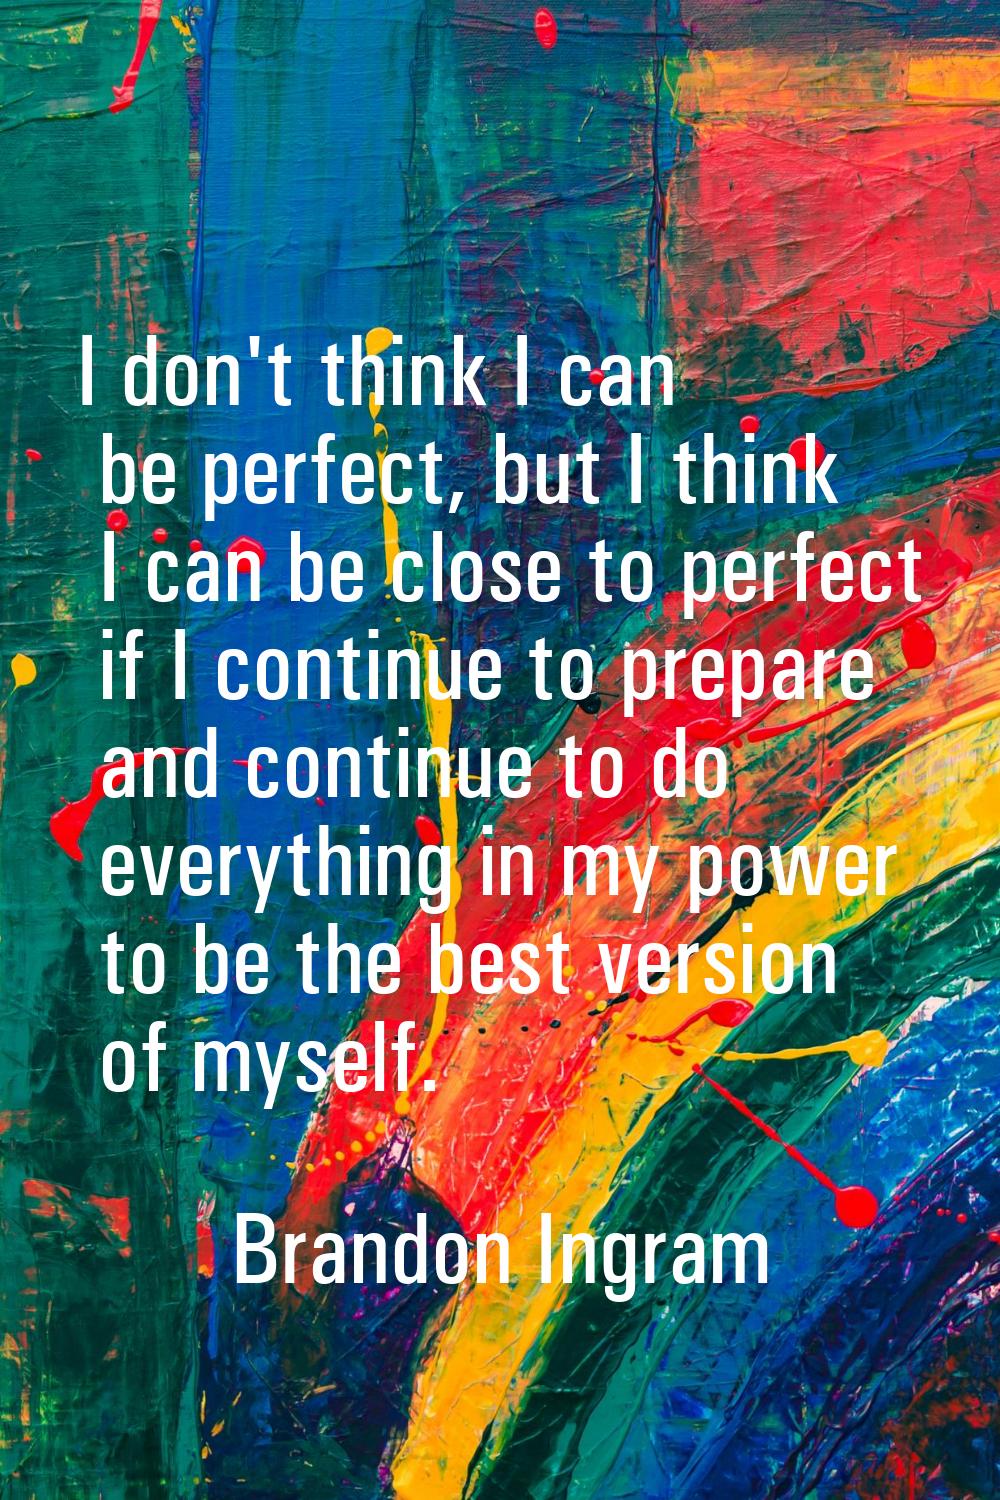 I don't think I can be perfect, but I think I can be close to perfect if I continue to prepare and 